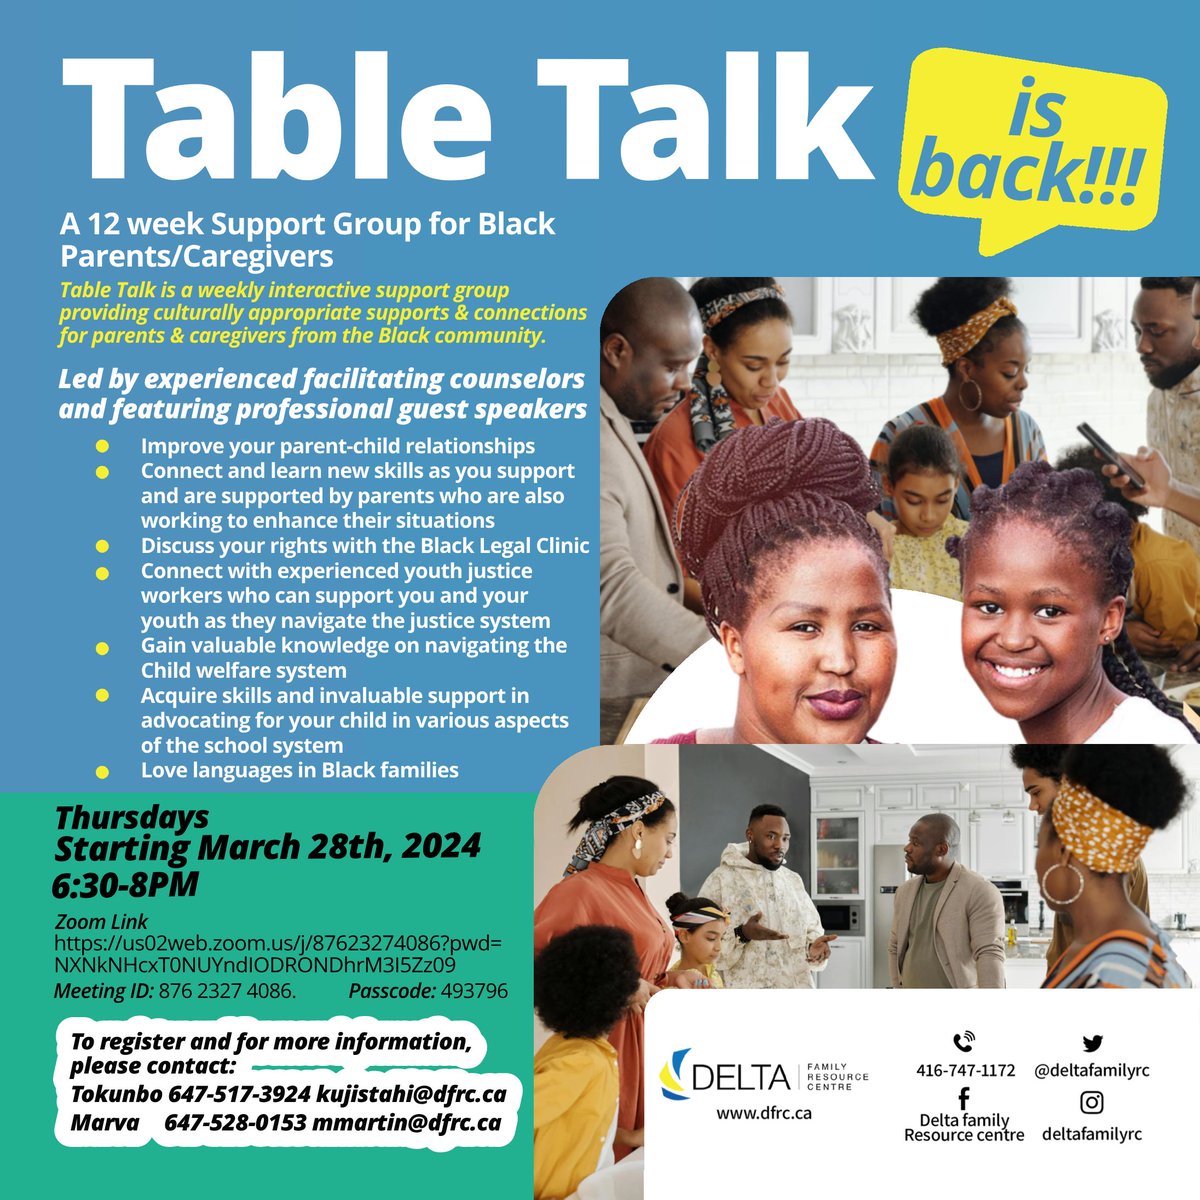 Table Talk is back!!!

This is a weekly interactive support group providing culturally appropriate supports and connections for parents and caregivers from the black community.

More details are on the flyer.

#blackfamilies #supportgroup #dfrc